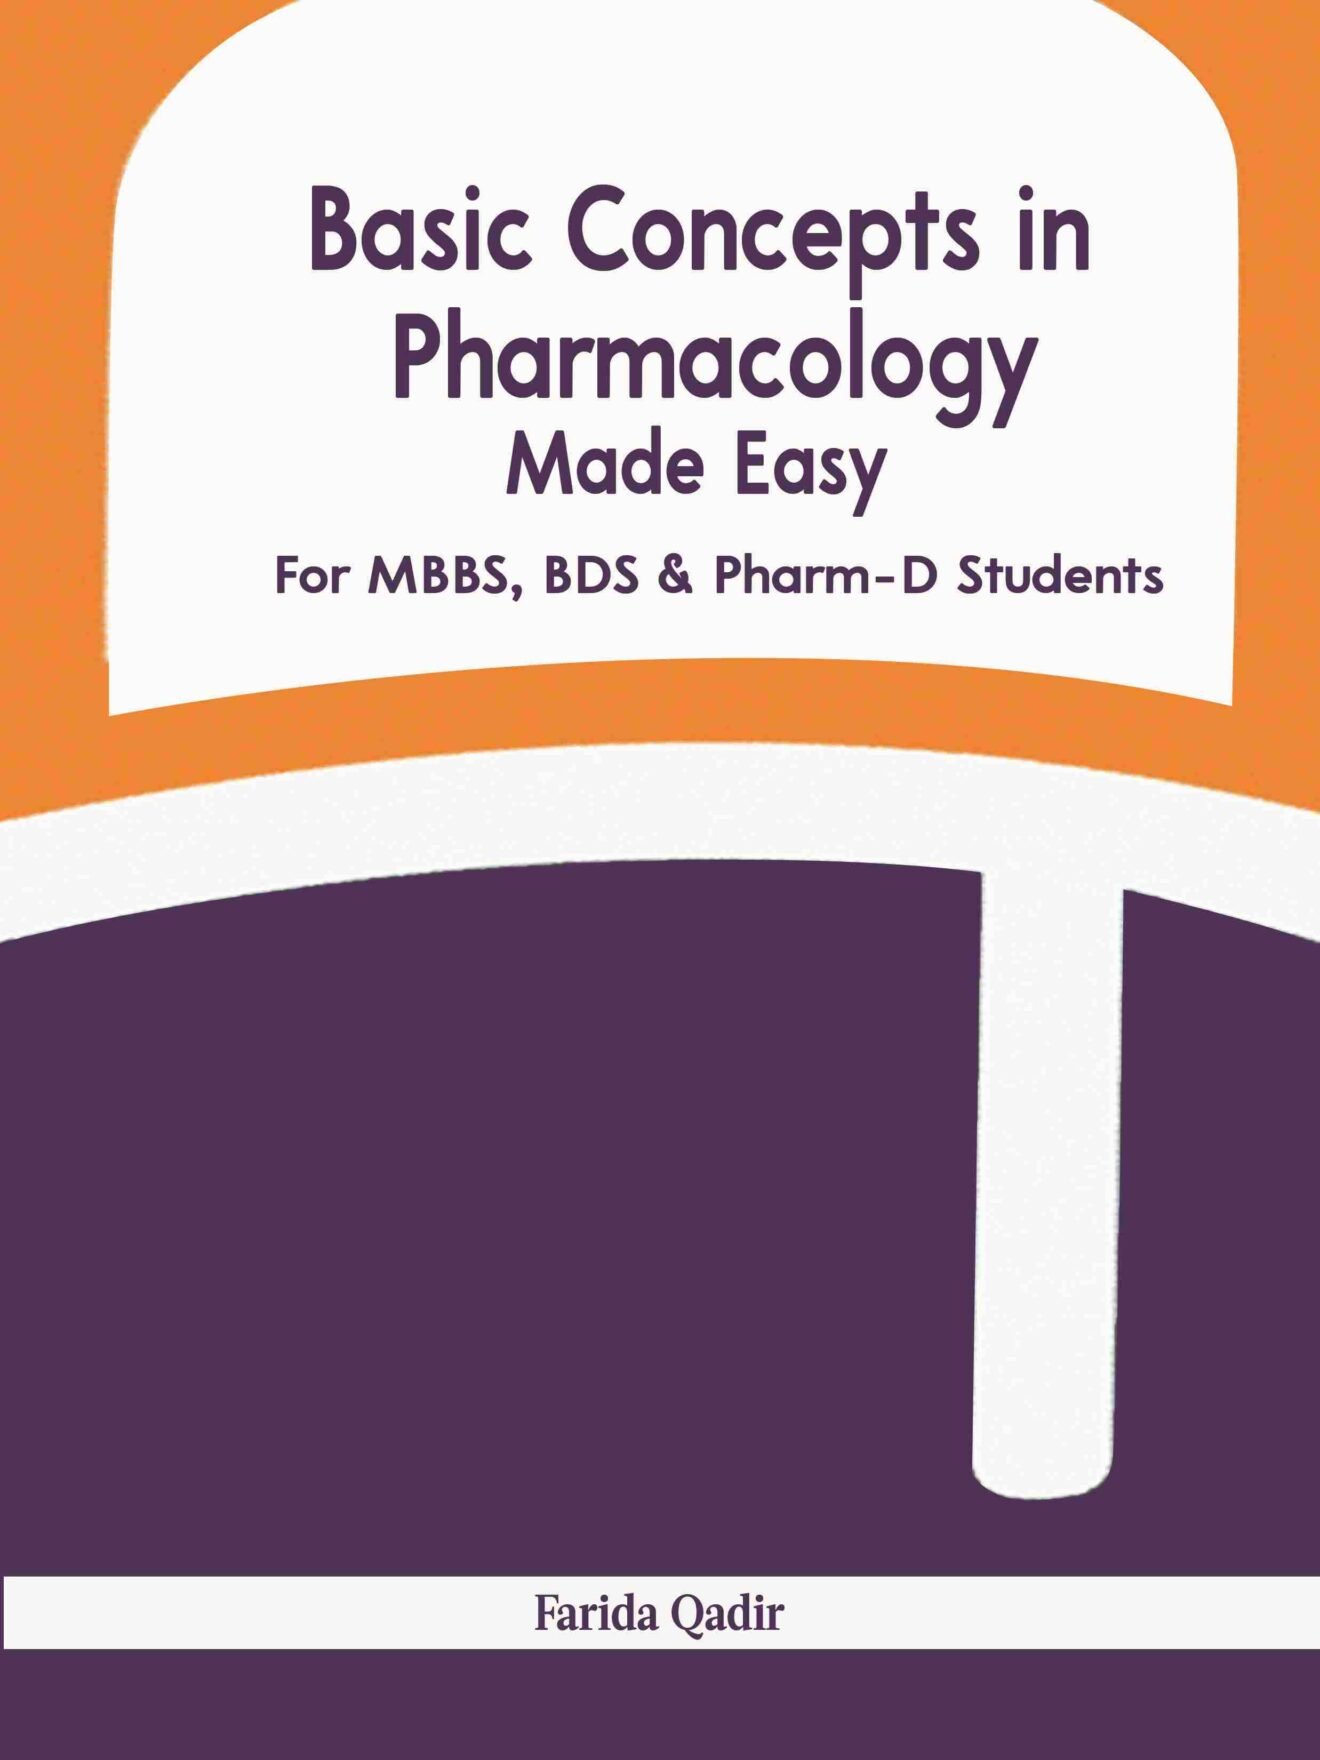 Basic Concepts In Pharmacology 1320x1760 